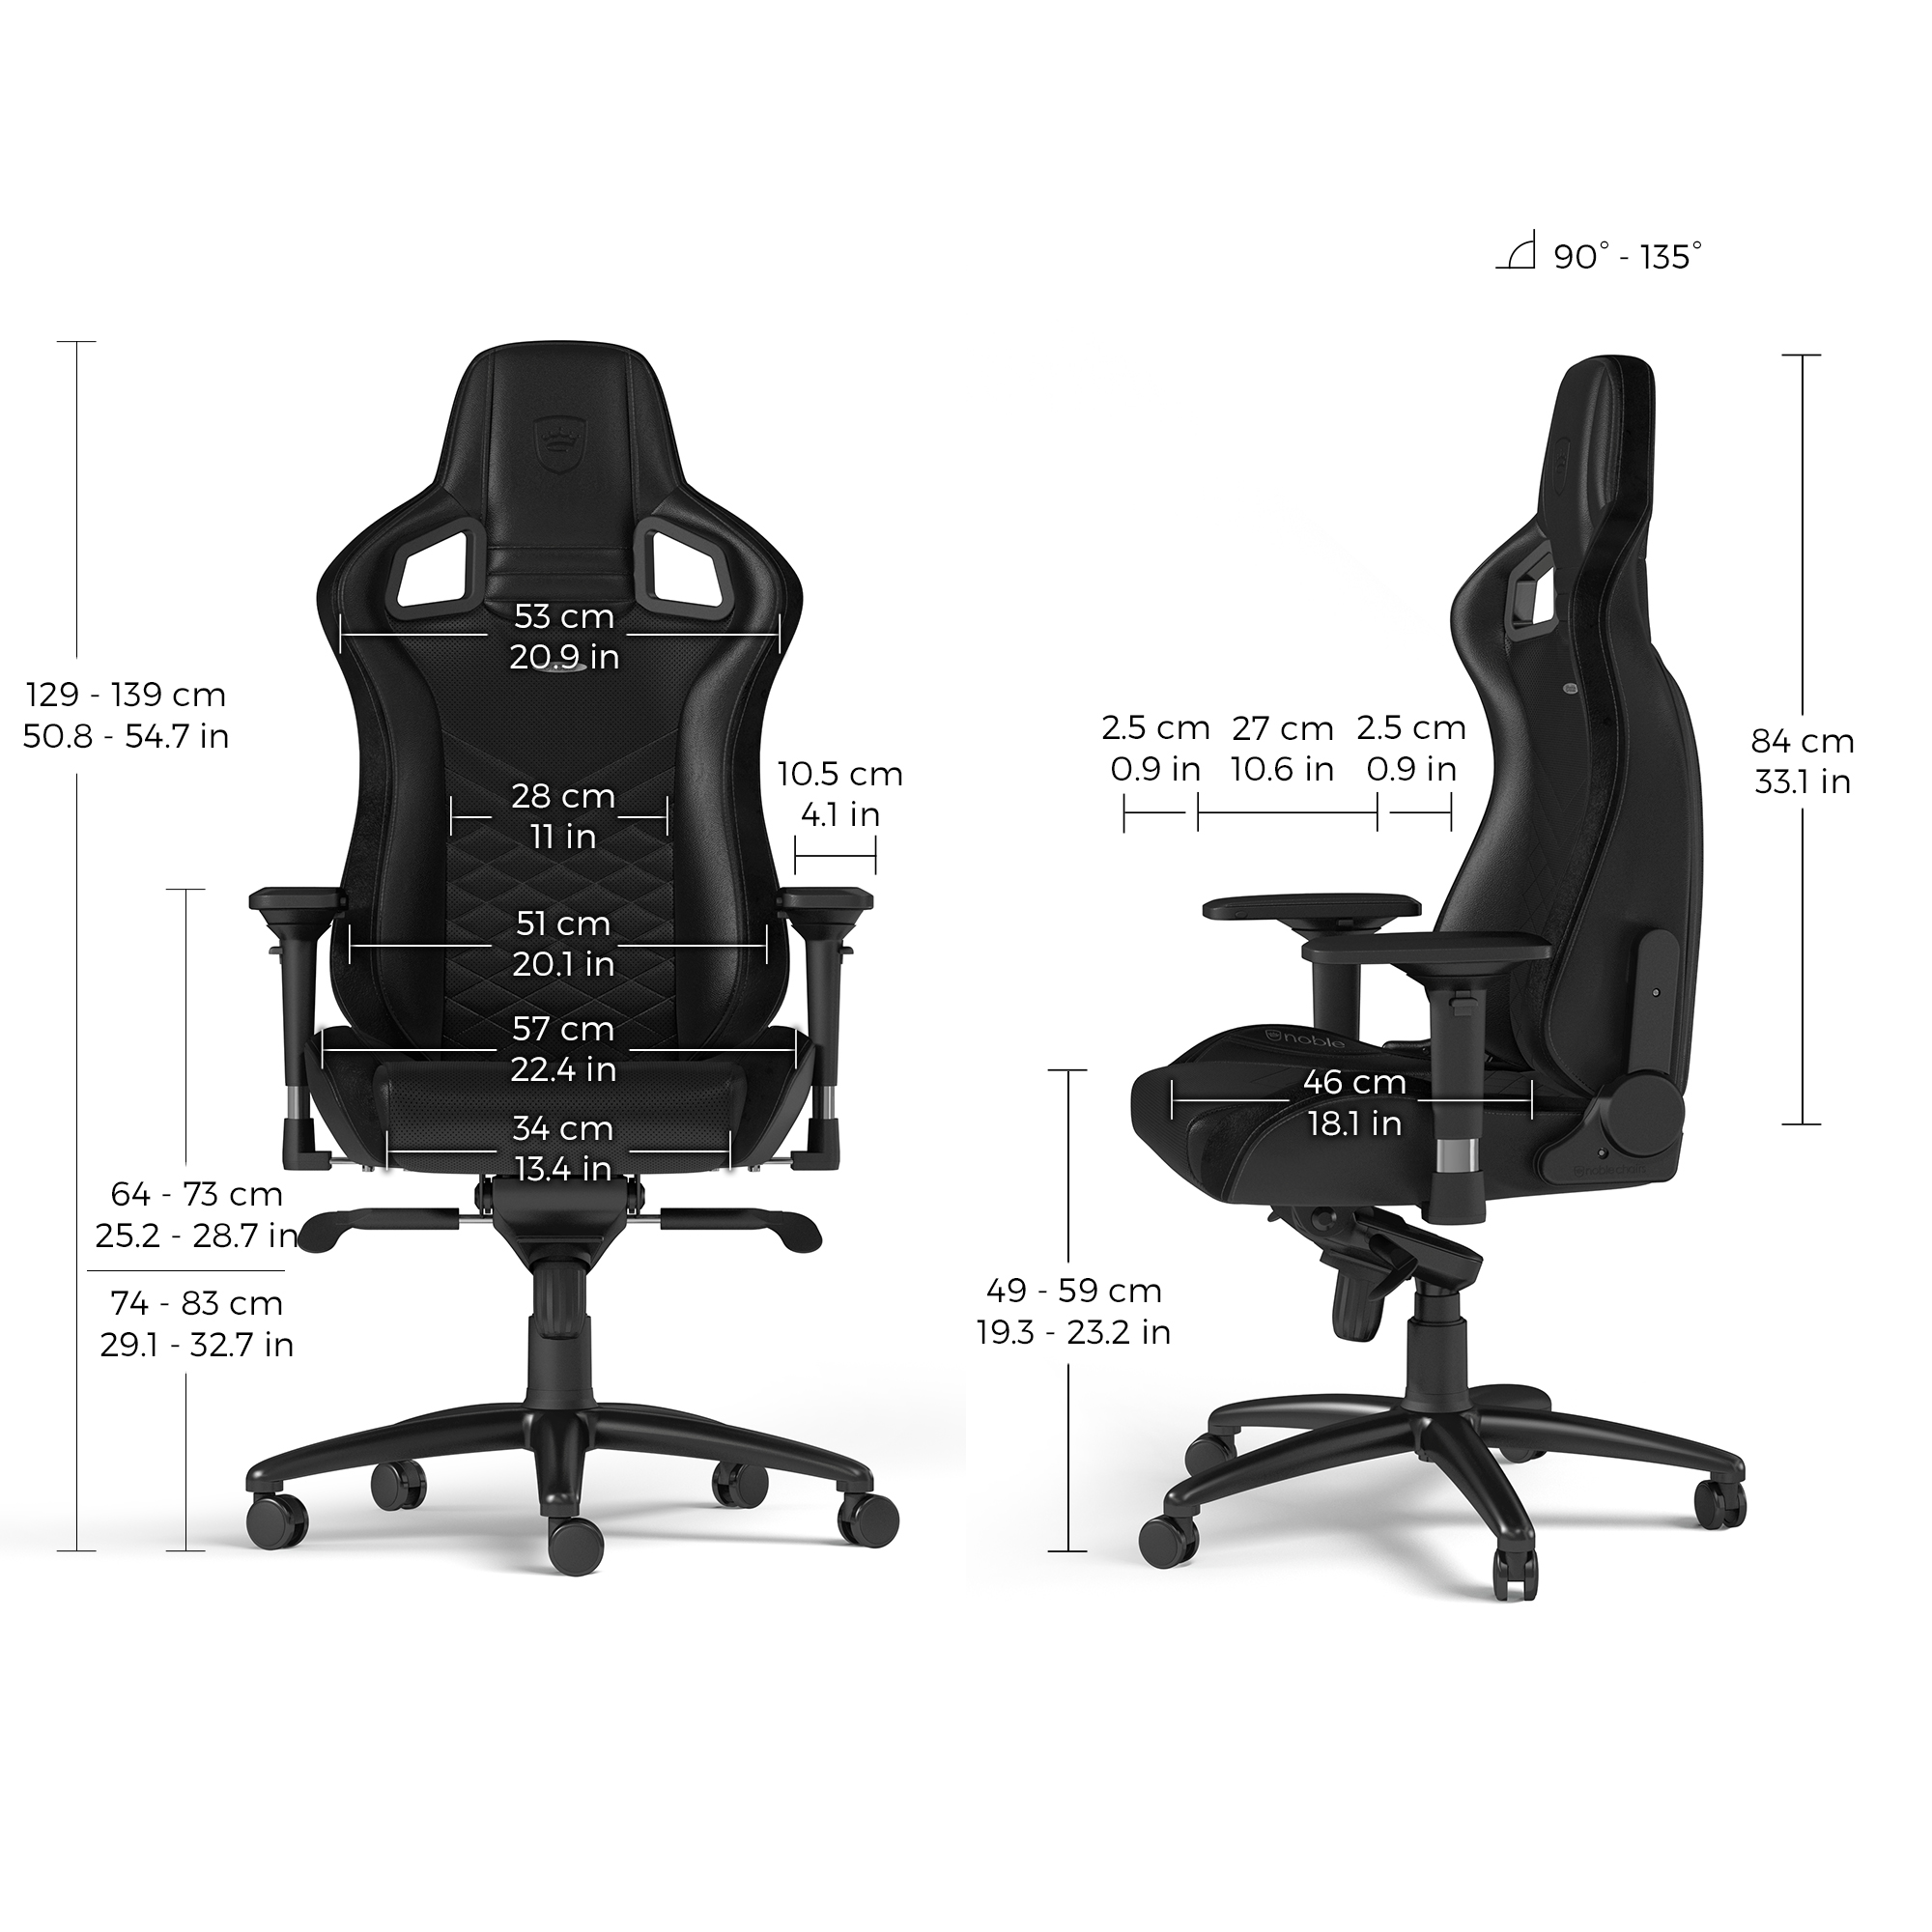 noblechairs - noblechairs EPIC Gaming Chair - Black